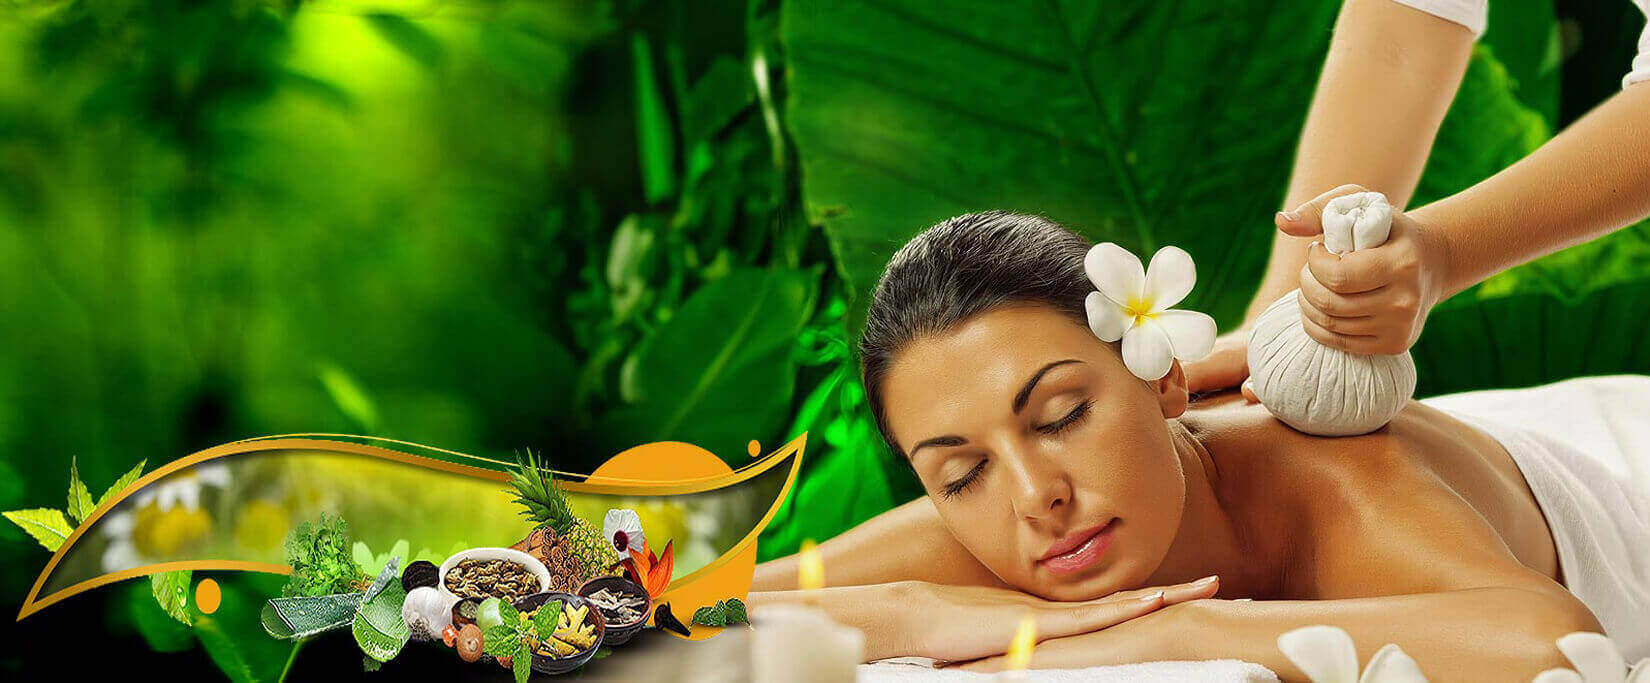 Experience the bliss of natural healing with panchakarma treatment